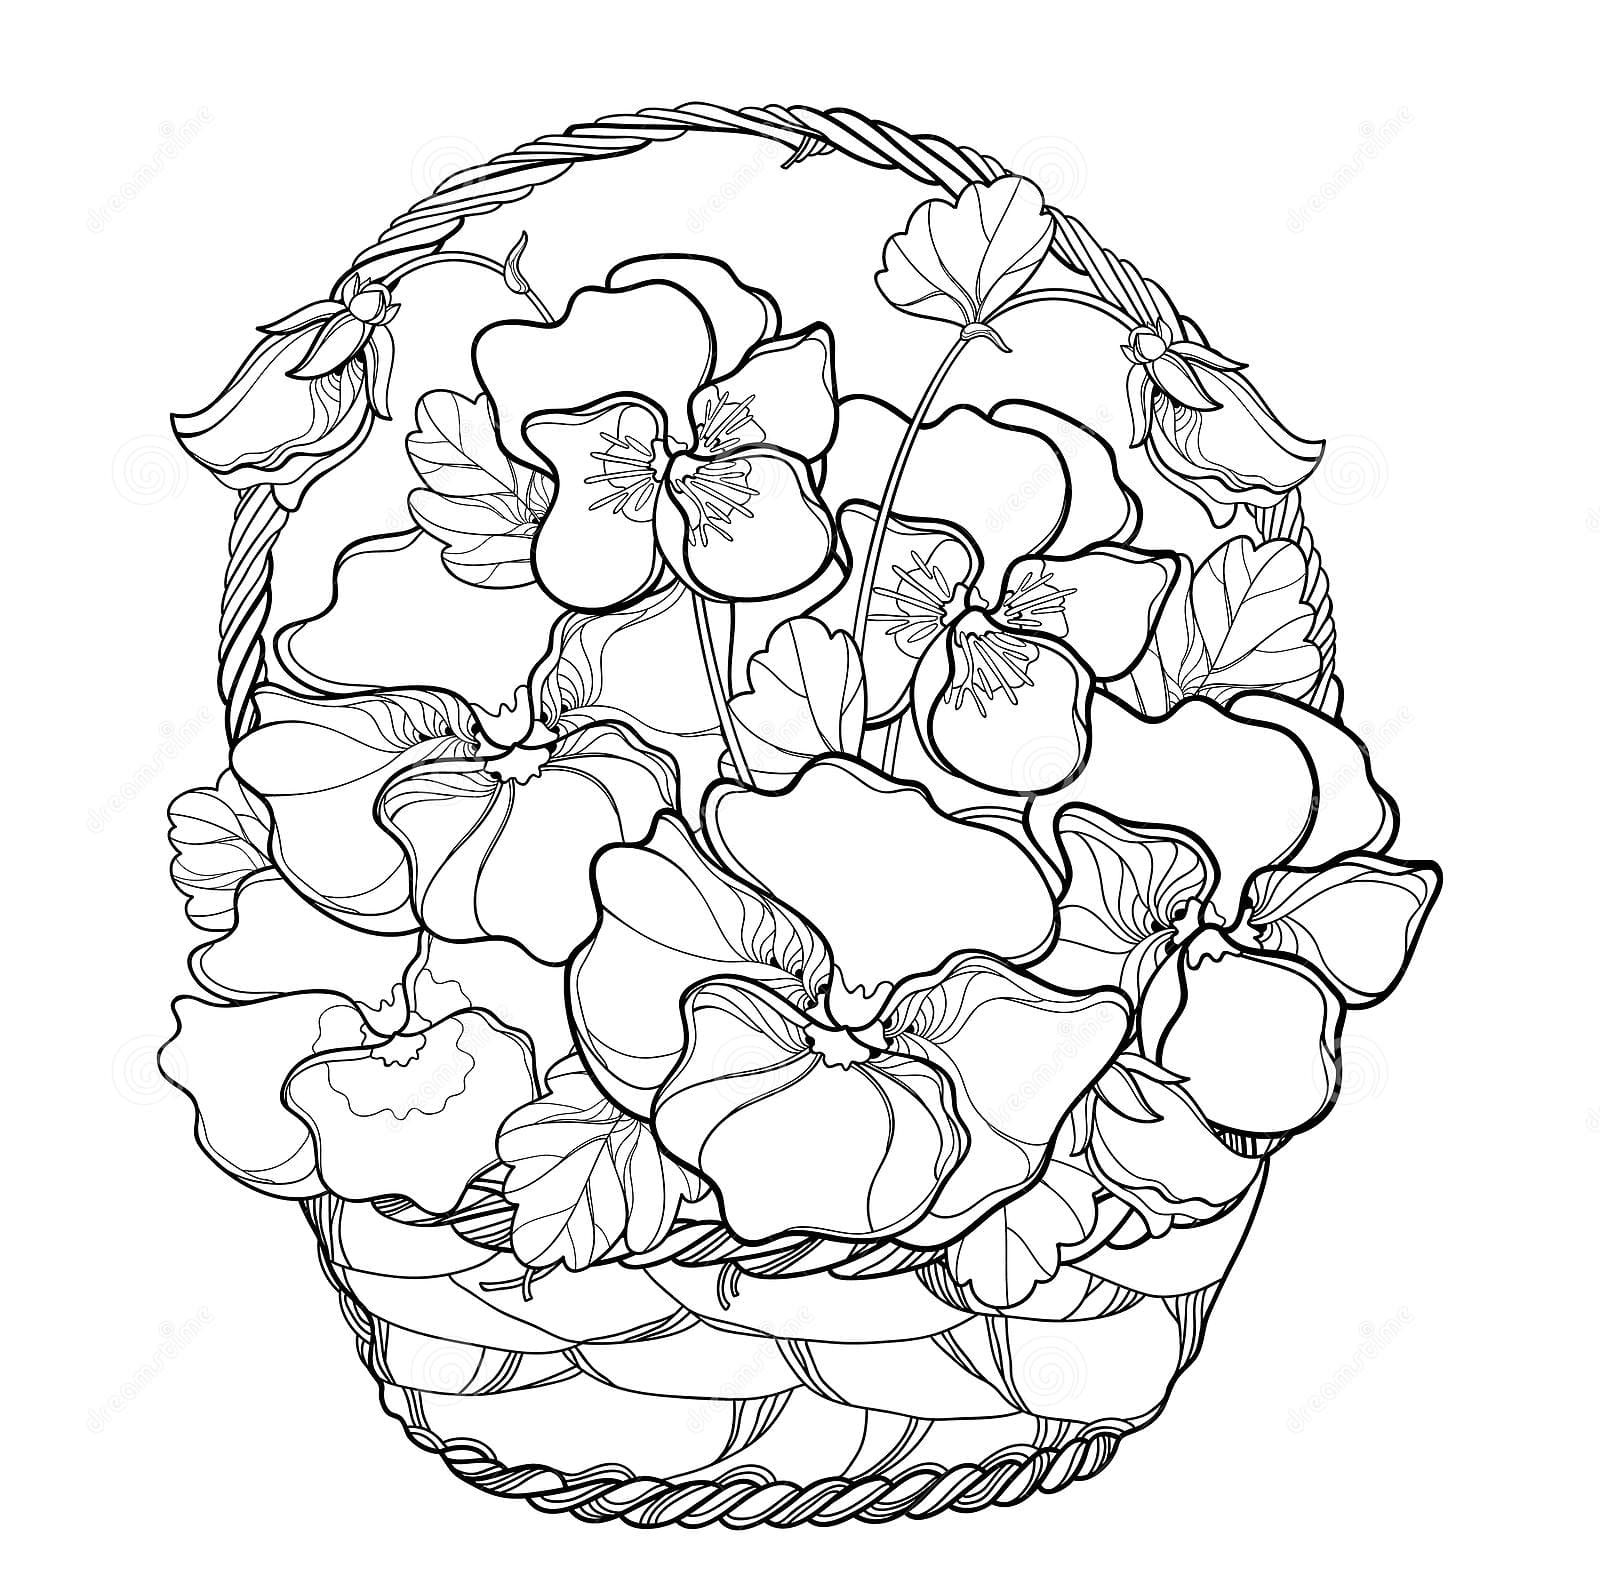 Pansy Image Free Coloring Page